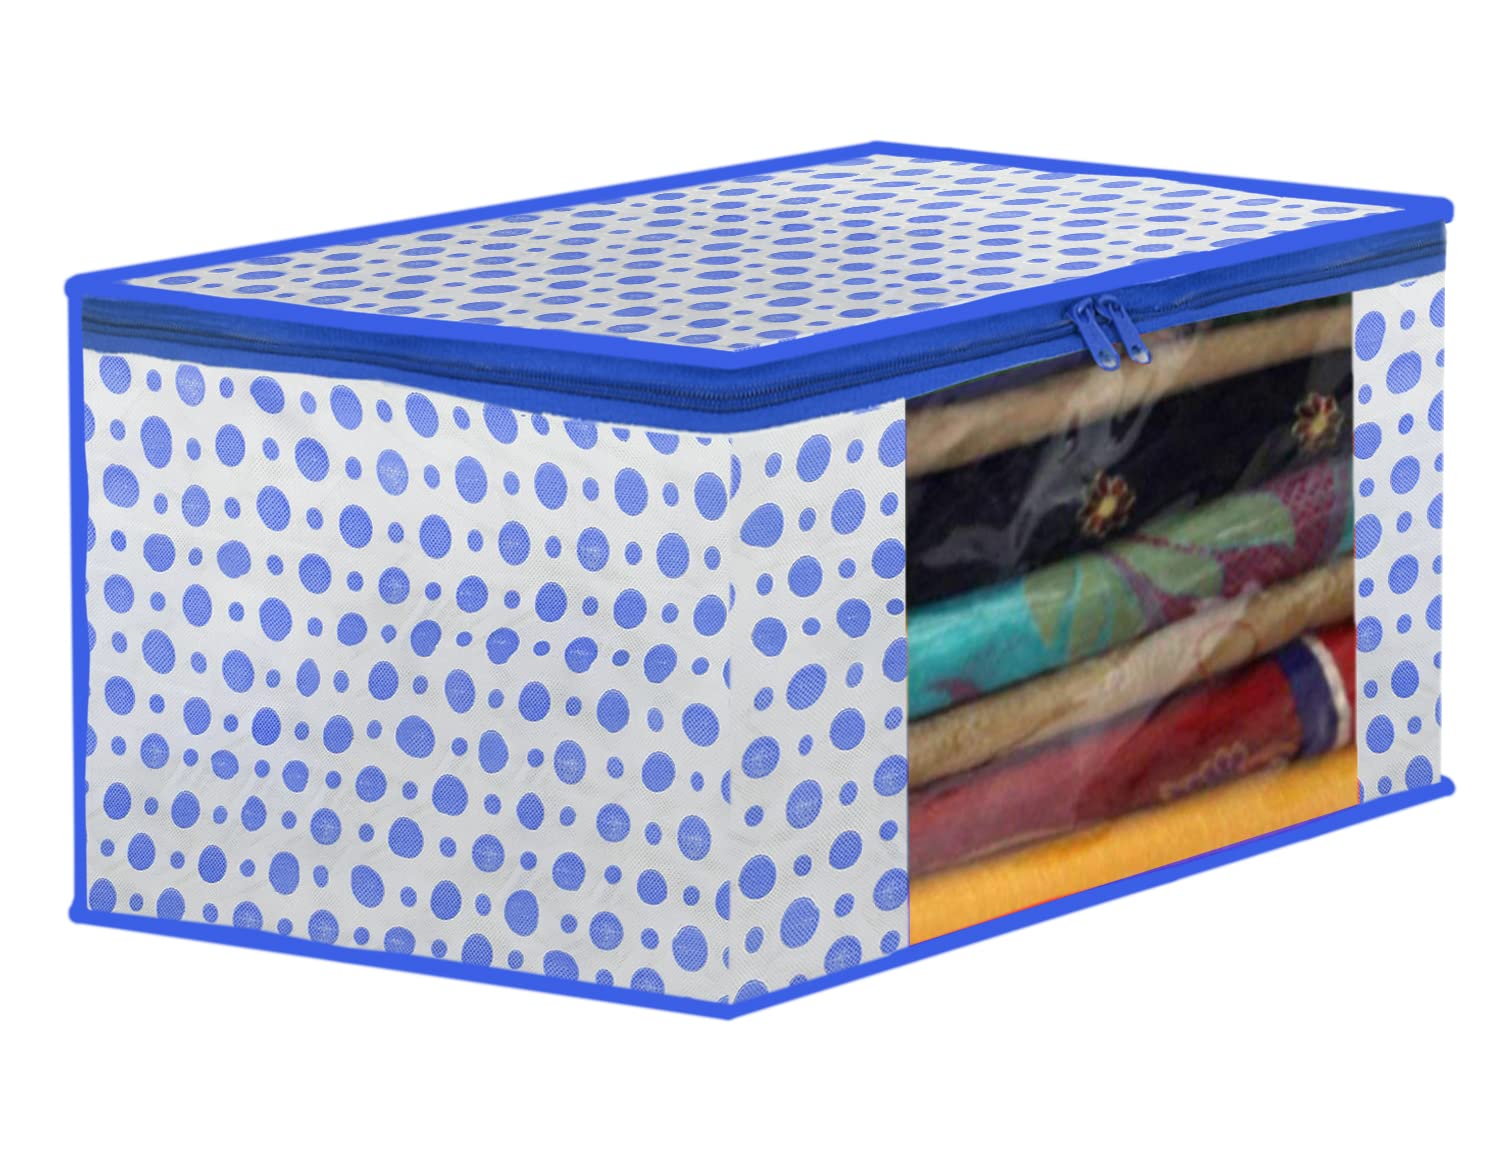 Kuber Industries Dot Printed Non-Woven Saree Cover, Cloth Organizer, Wardrobe Organiser With Tranasparent Window- Pack of 4 (Blue & Pink)-46KM0508